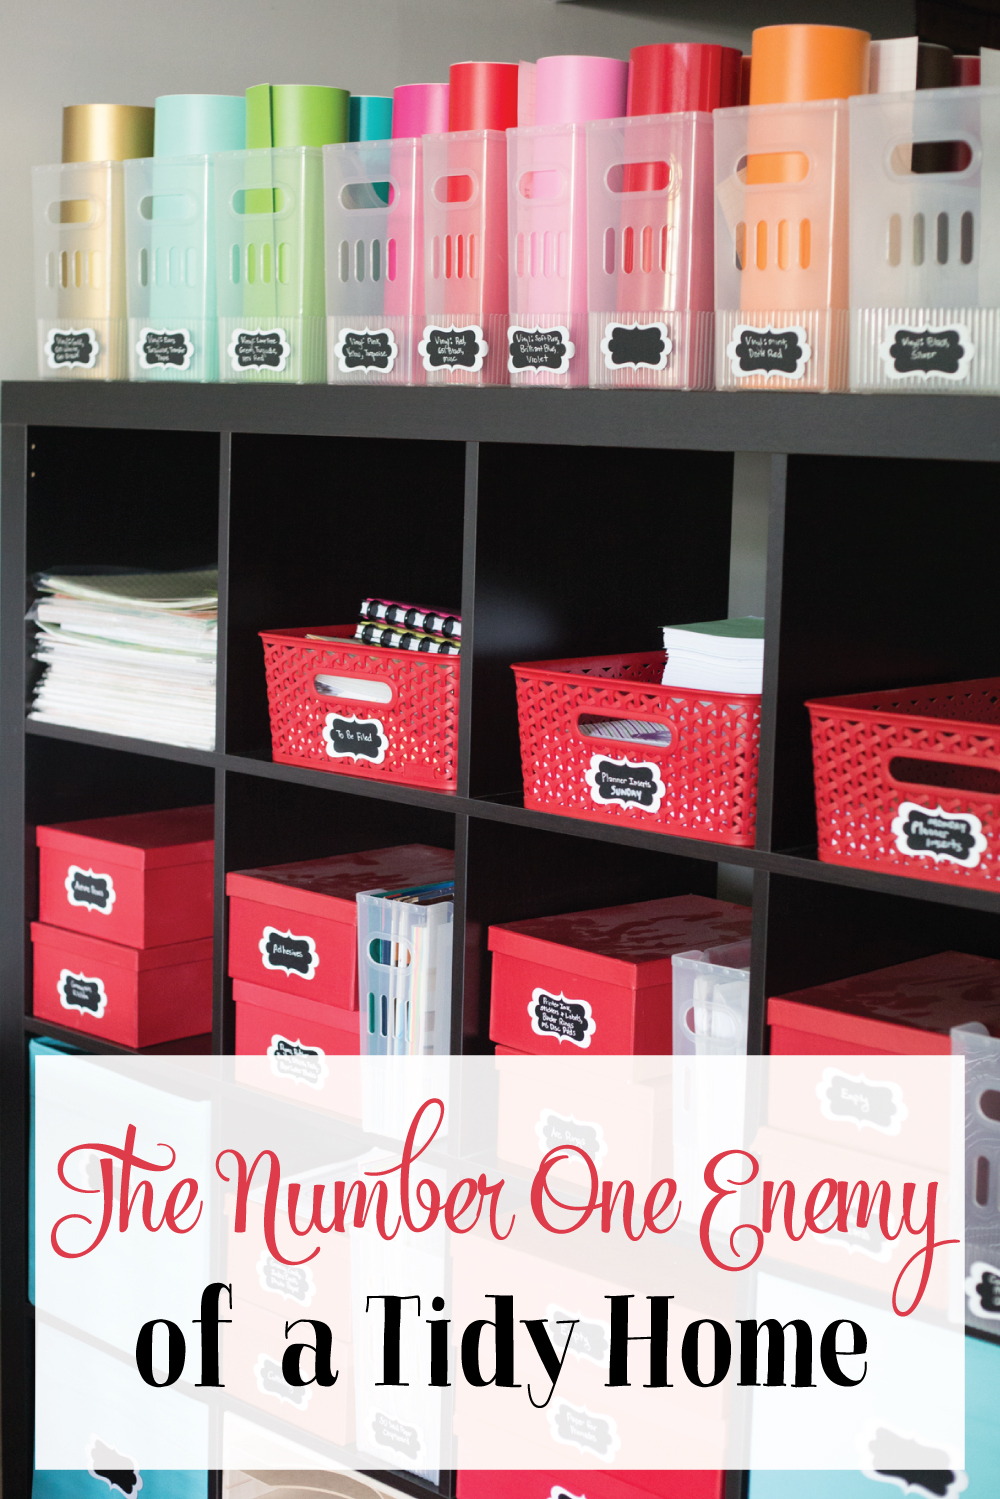 Discover the number one enemy of a tidy home and how to overcome it.